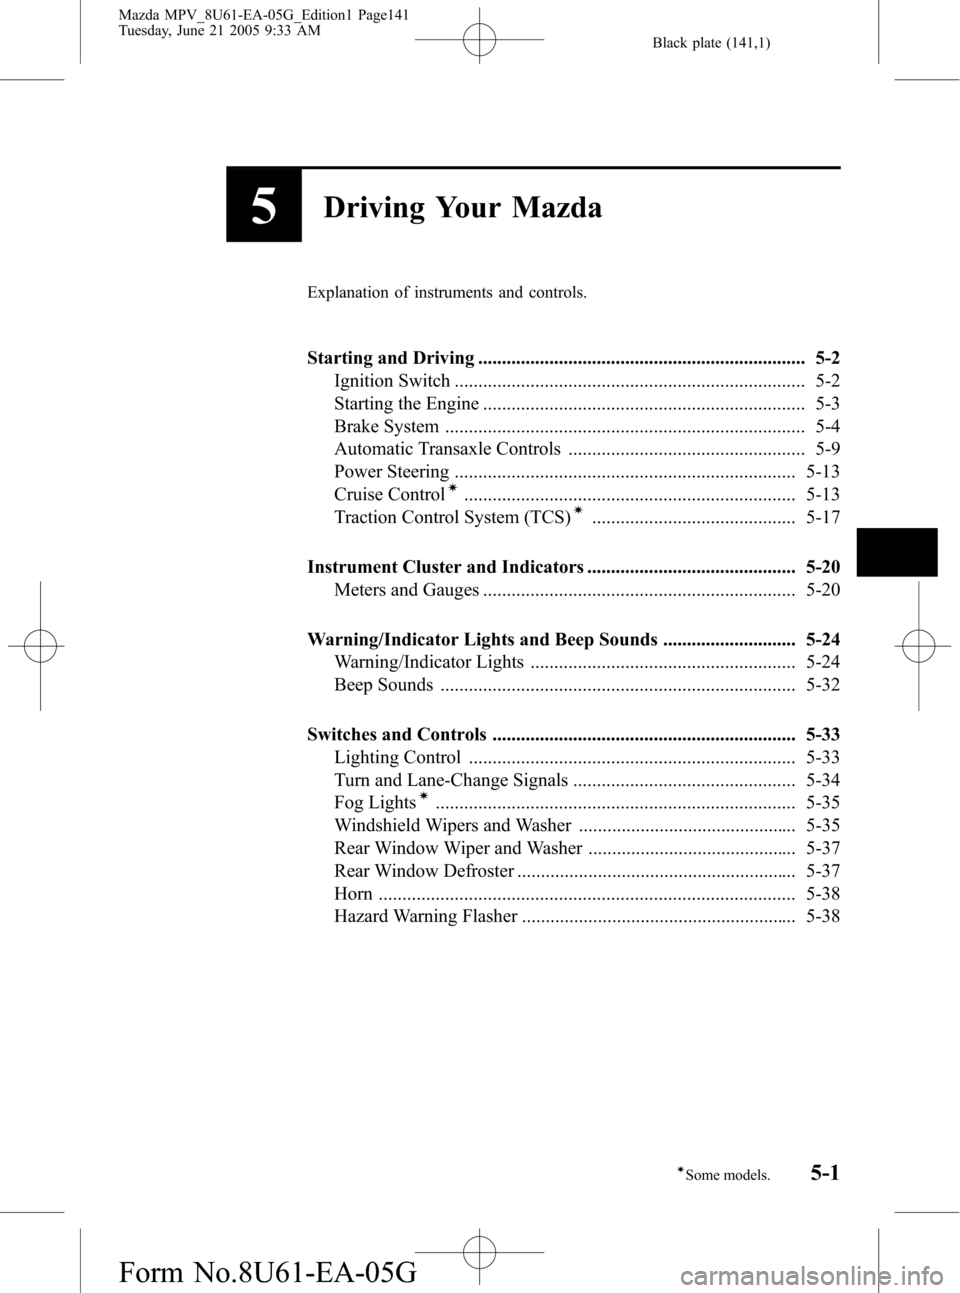 MAZDA MODEL MPV 2006  Owners Manual (in English) Black plate (141,1)
5Driving Your Mazda
Explanation of instruments and controls.
Starting and Driving ..................................................................... 5-2
Ignition Switch ........